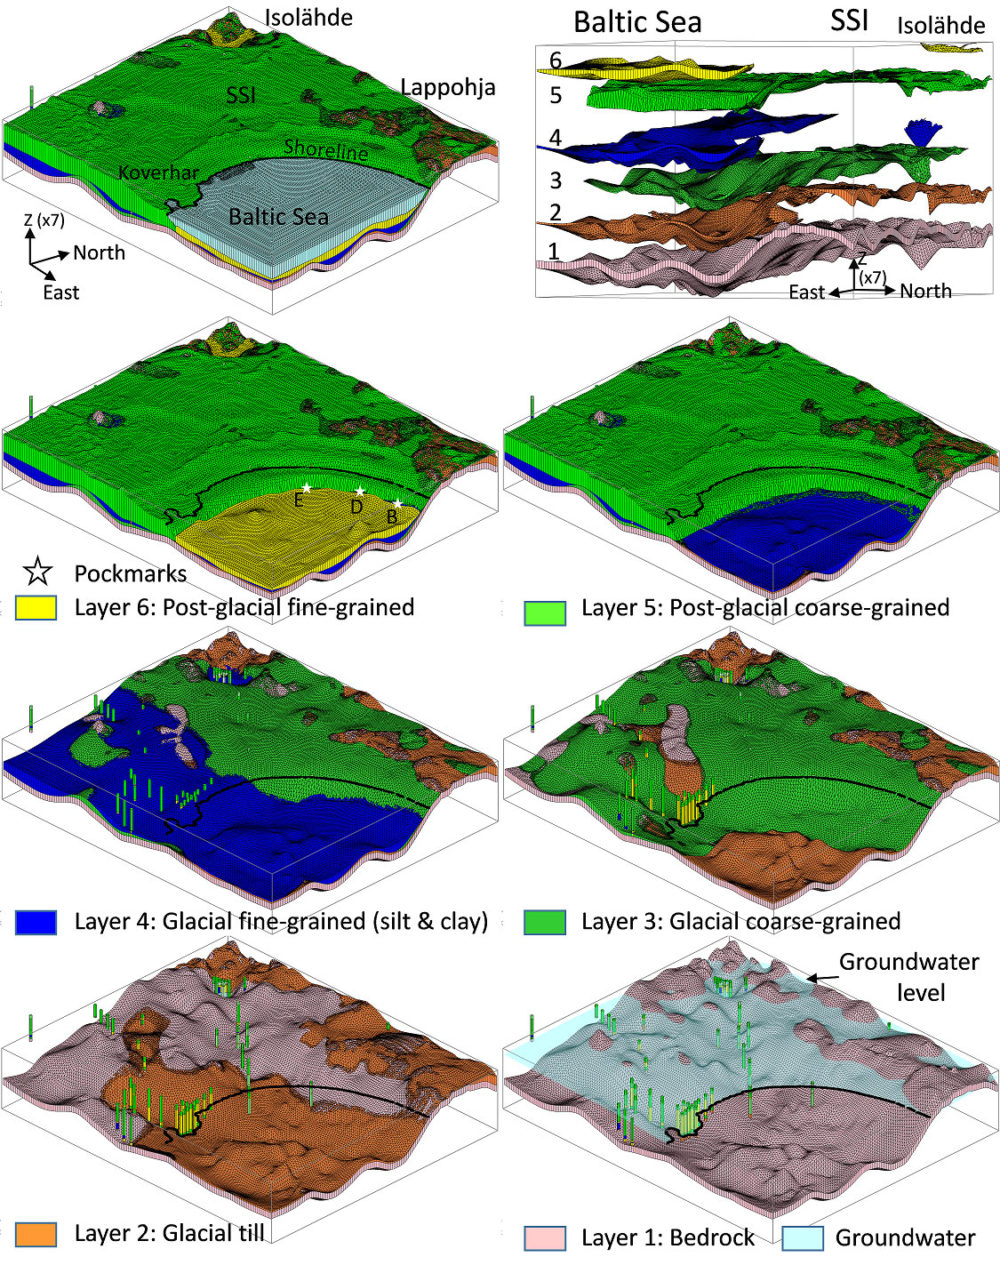 Fig. 2. 3D geological model of late Pleistocene and Holocene depositional units at the SDG site in Hanko-Lappohja.